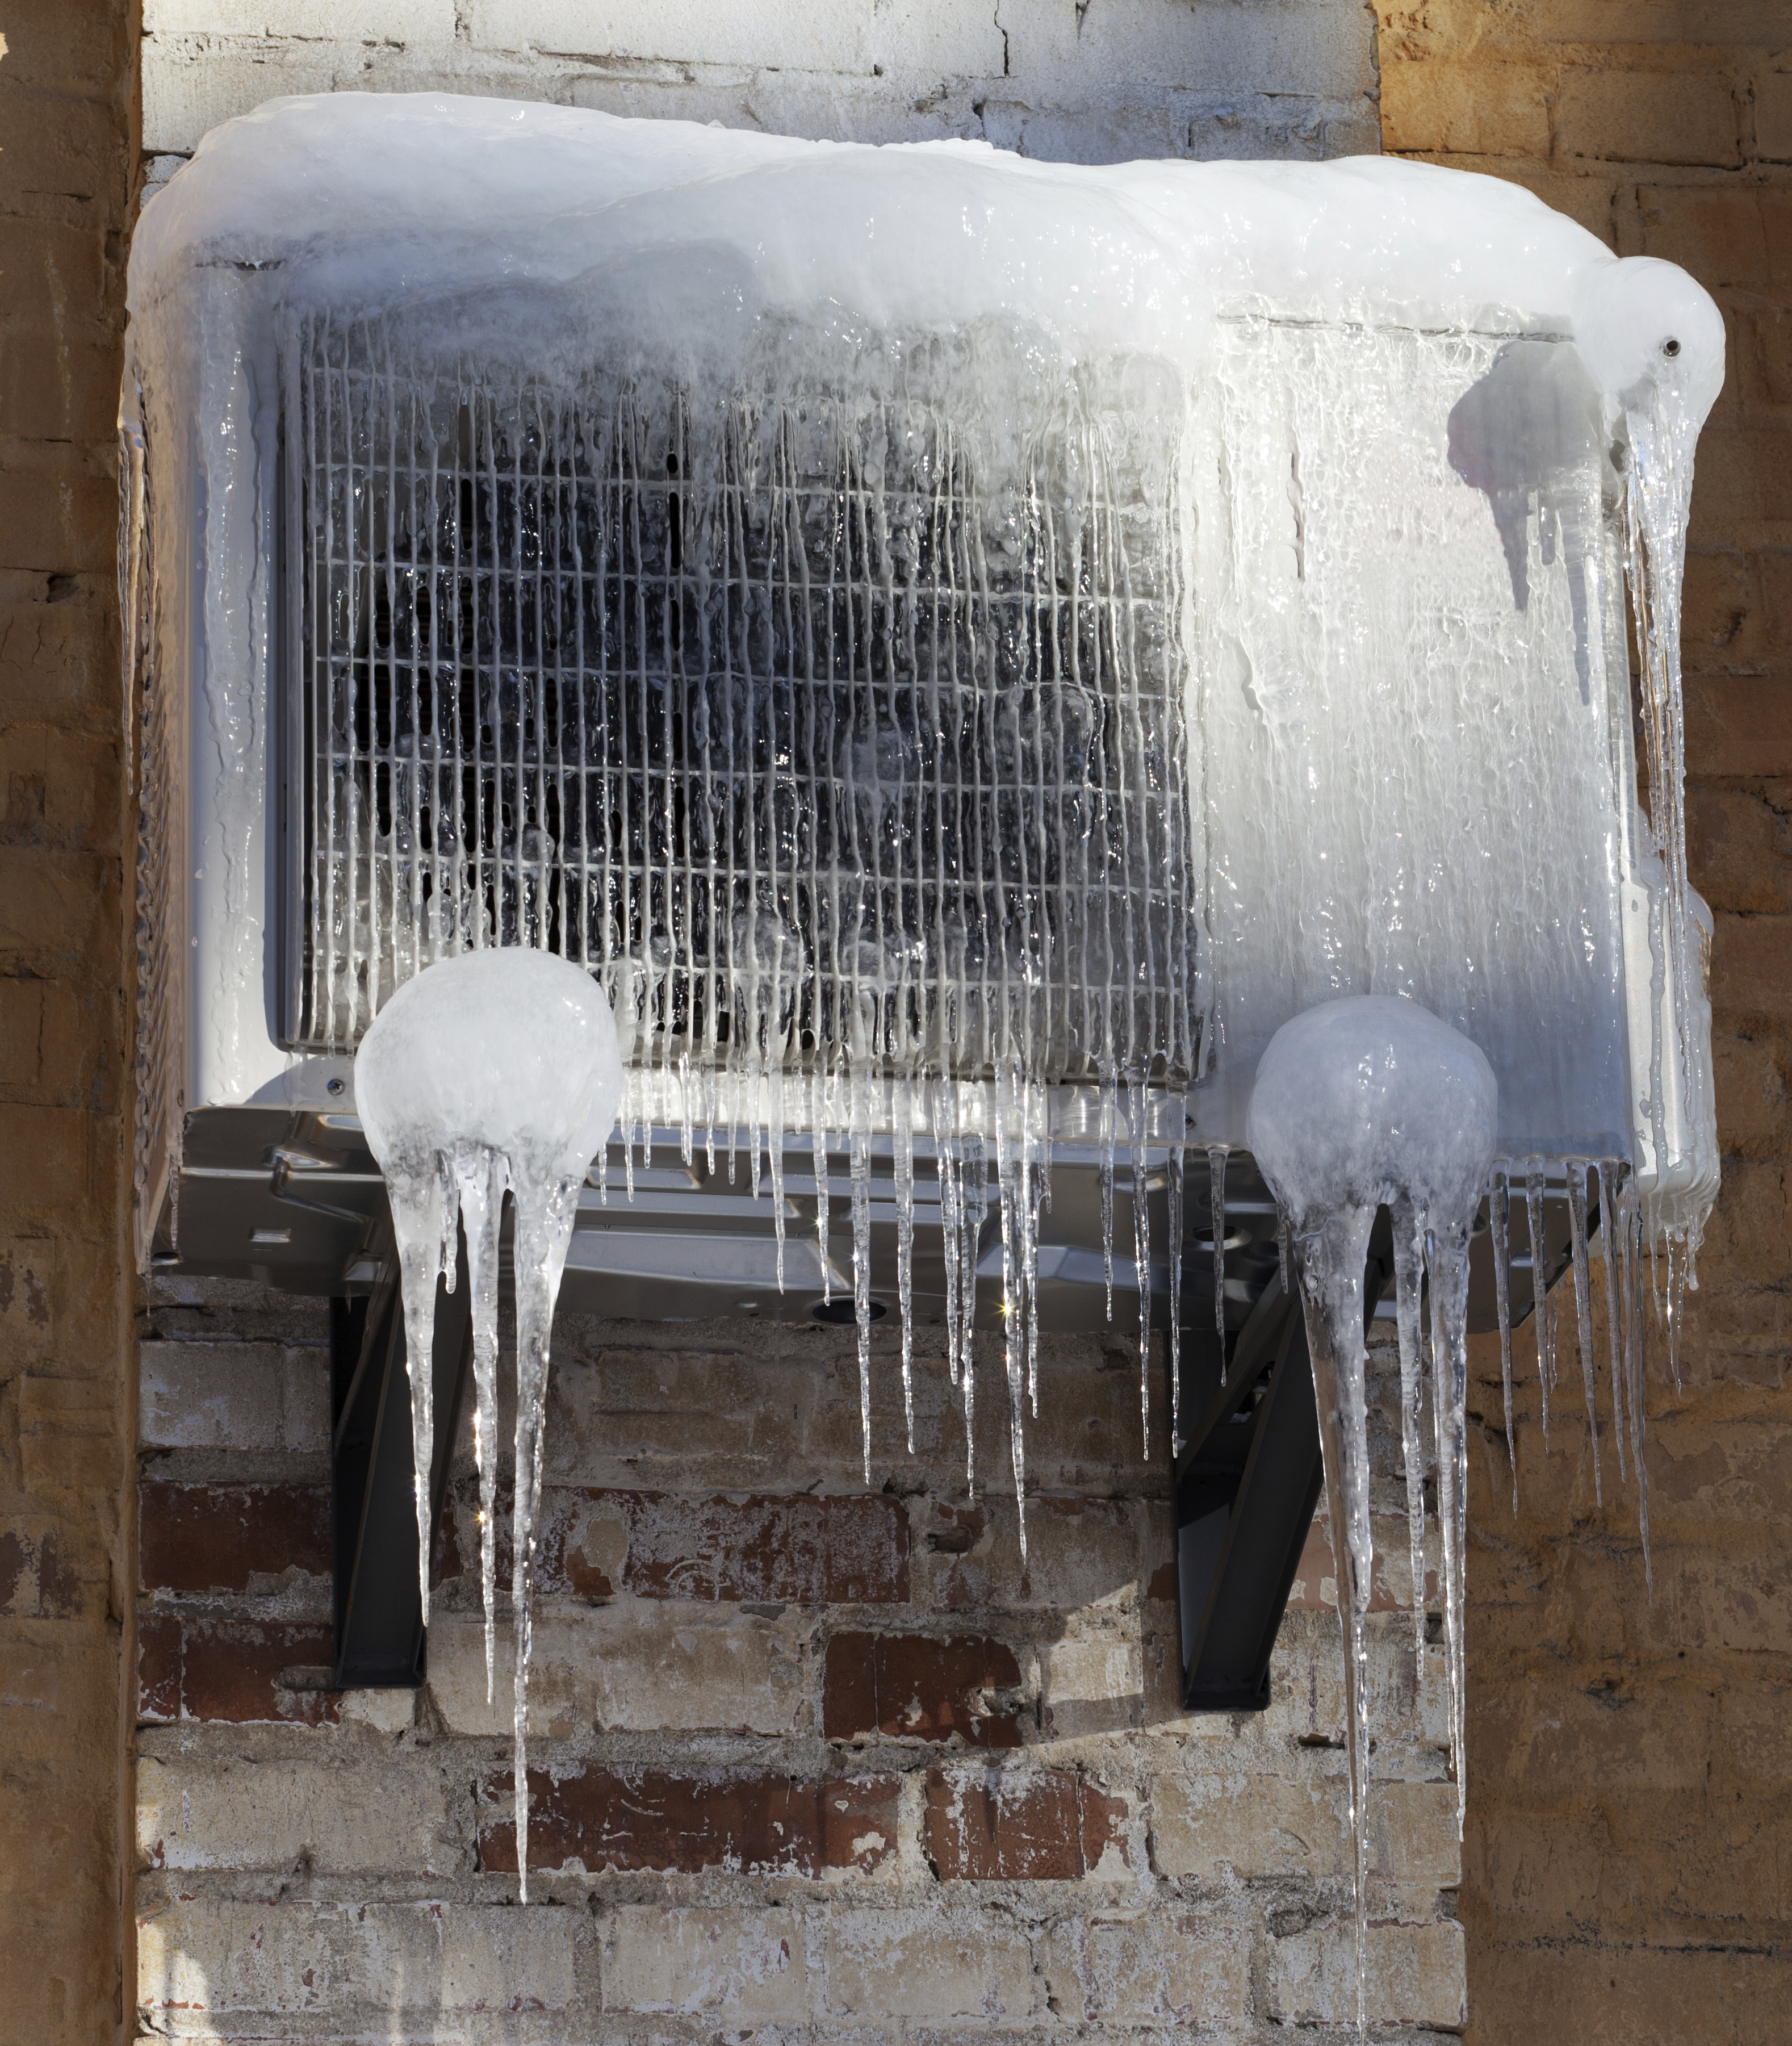 How to Protect Tankless Water Heater from Freezing 